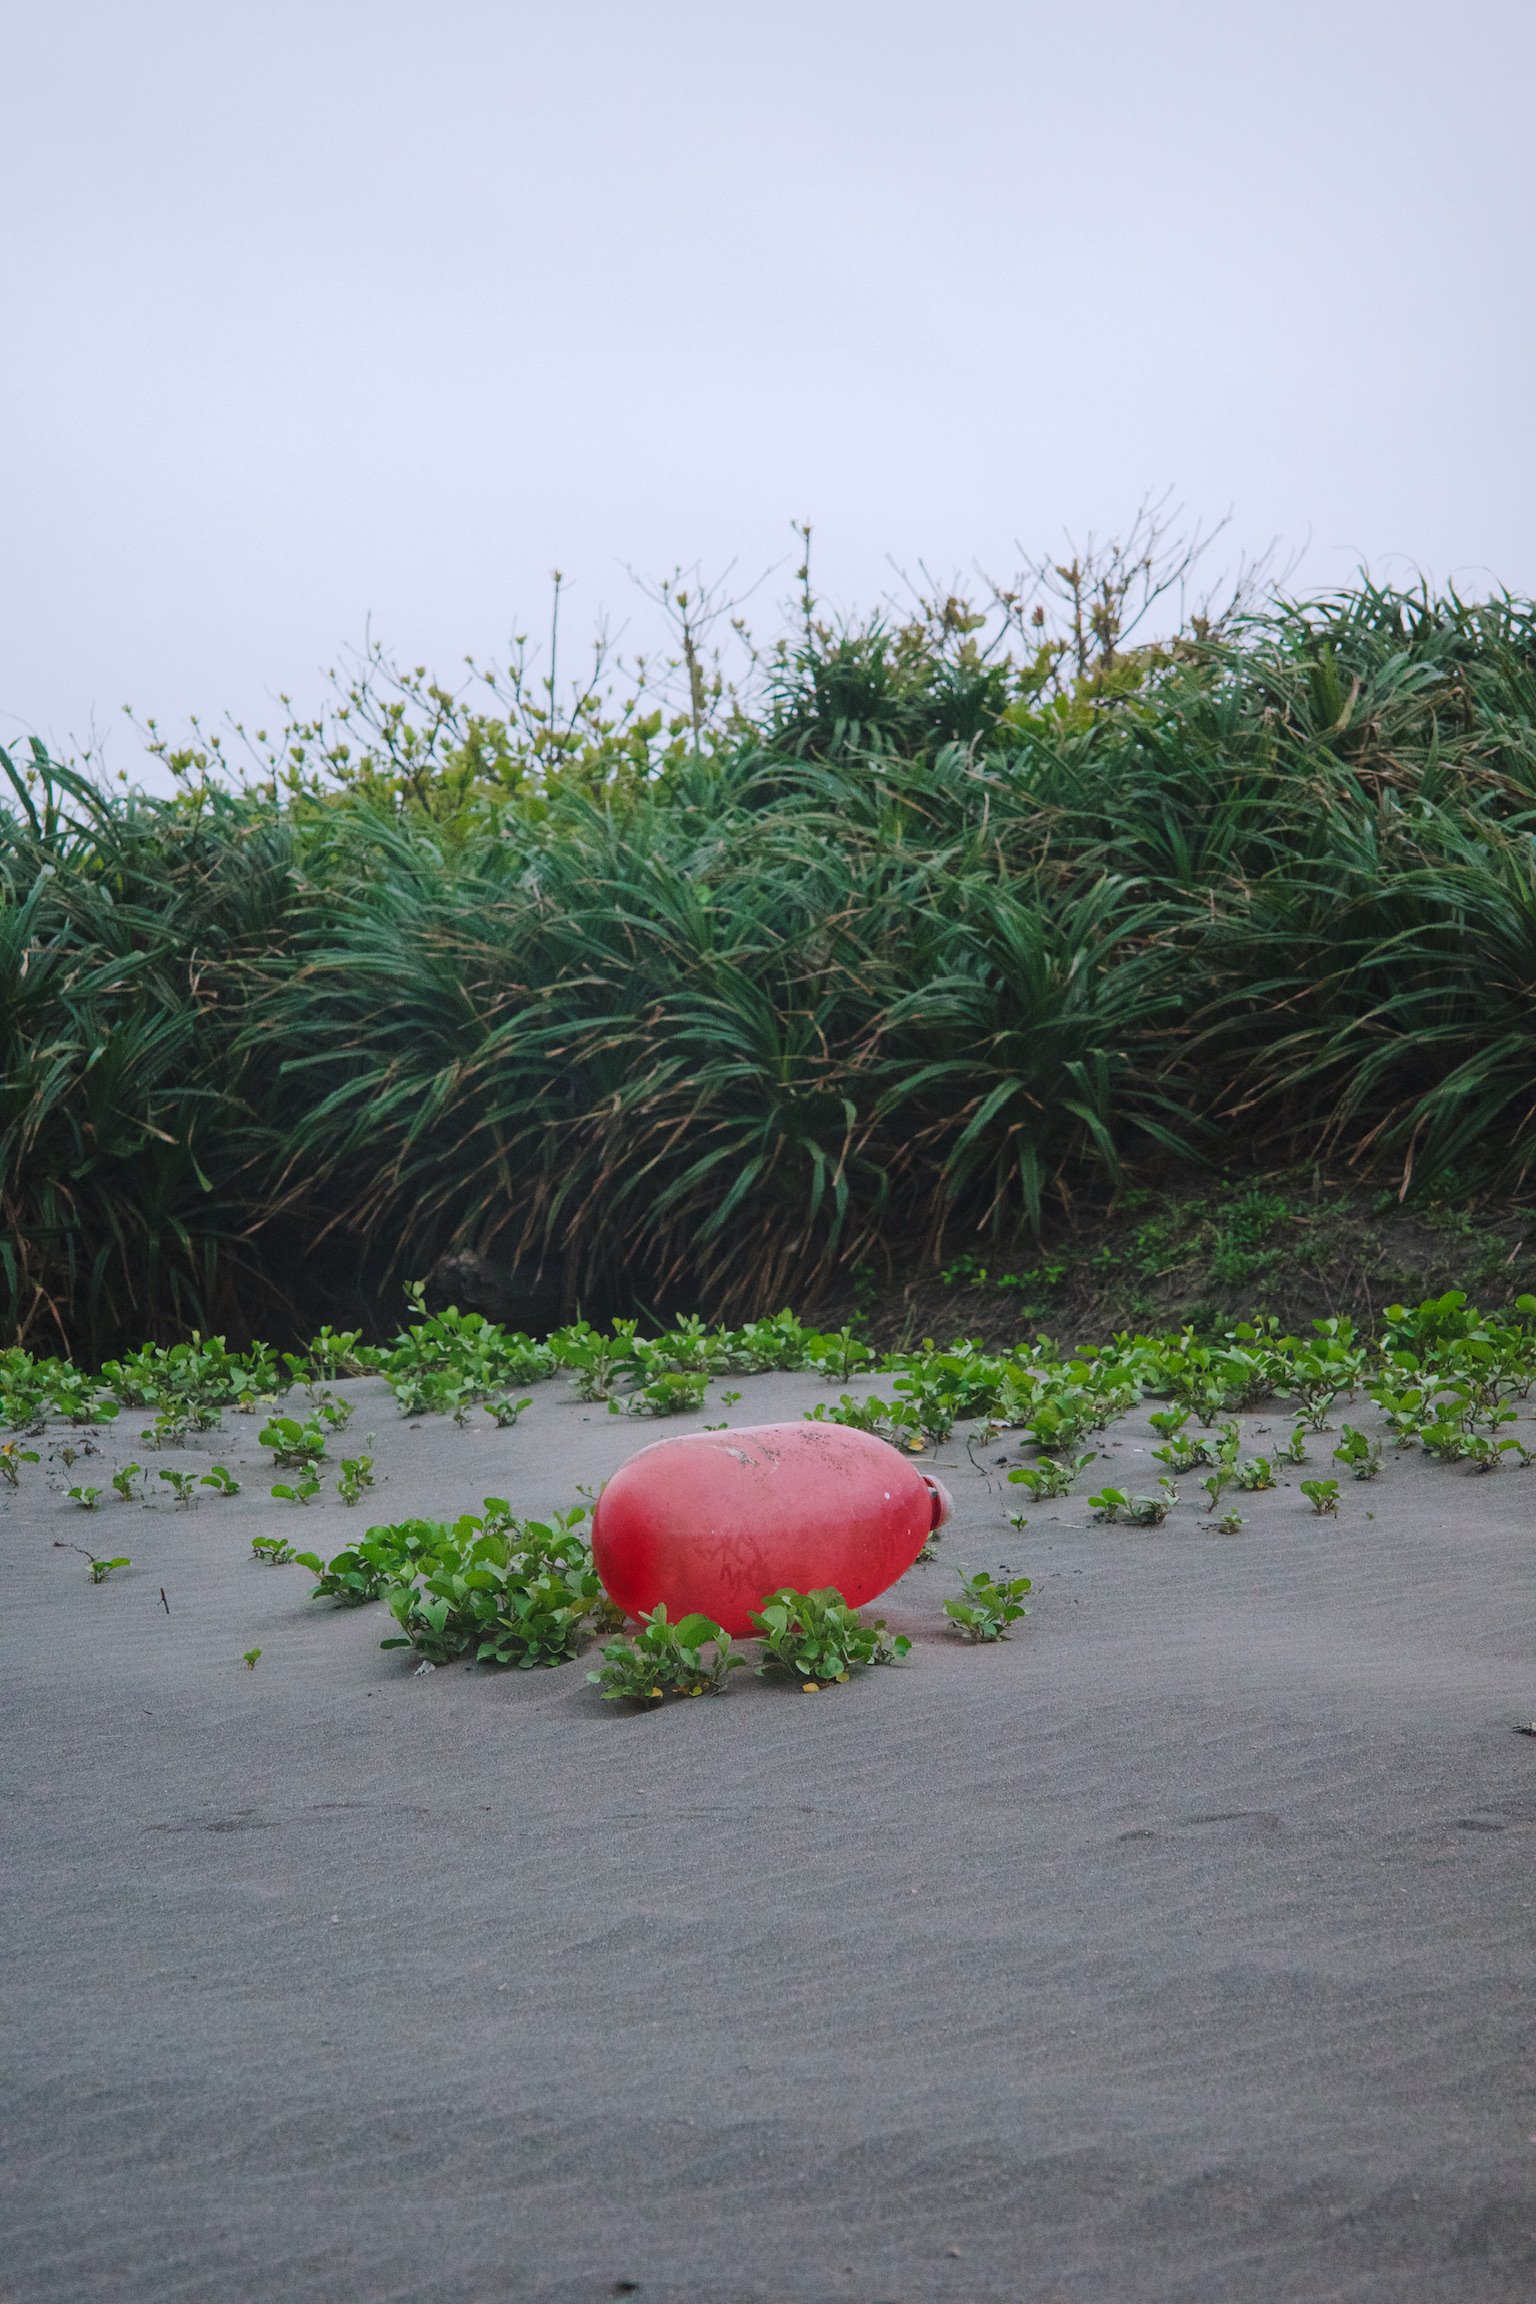 A red plastic chubby water container laying on the beach with greens in the background on a cloudy day.